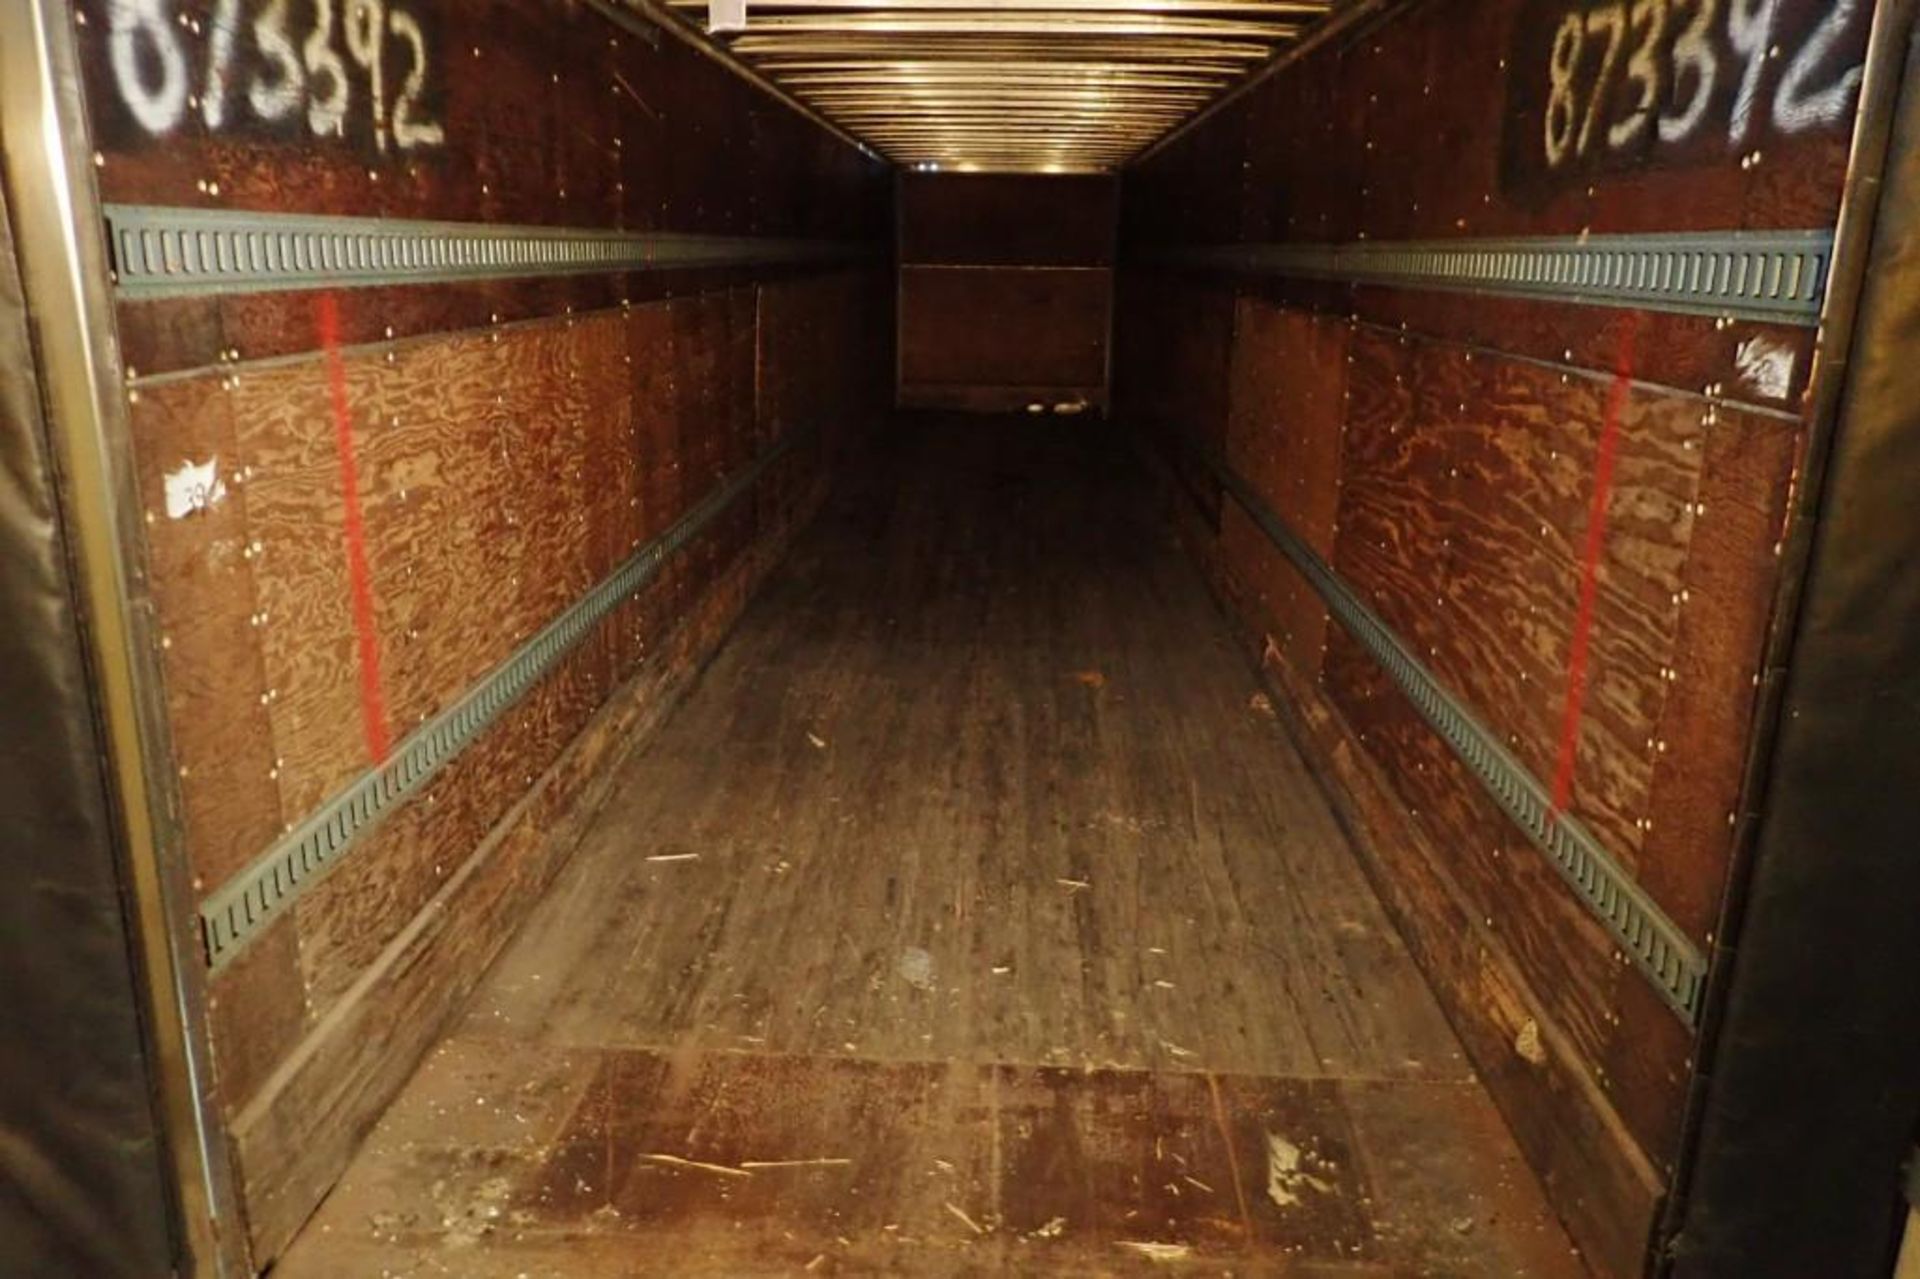 1987 Great Dane 48 ft. dry van trailer {Located in Plymouth, IN} - Image 14 of 14